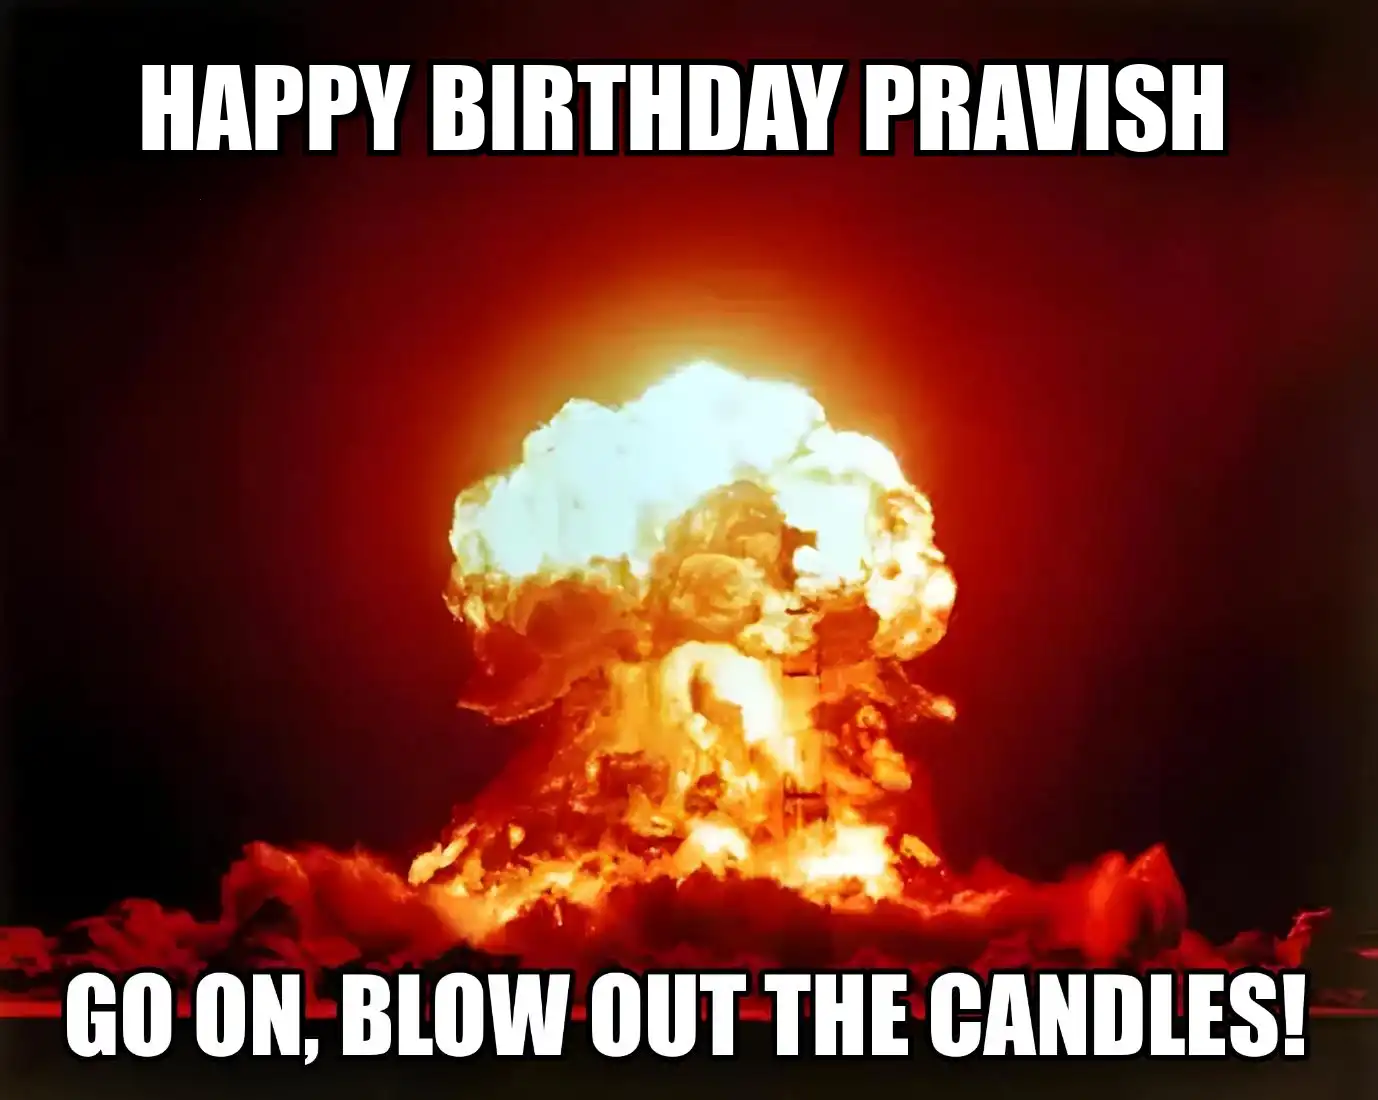 Happy Birthday Pravish Go On Blow Out The Candles Meme